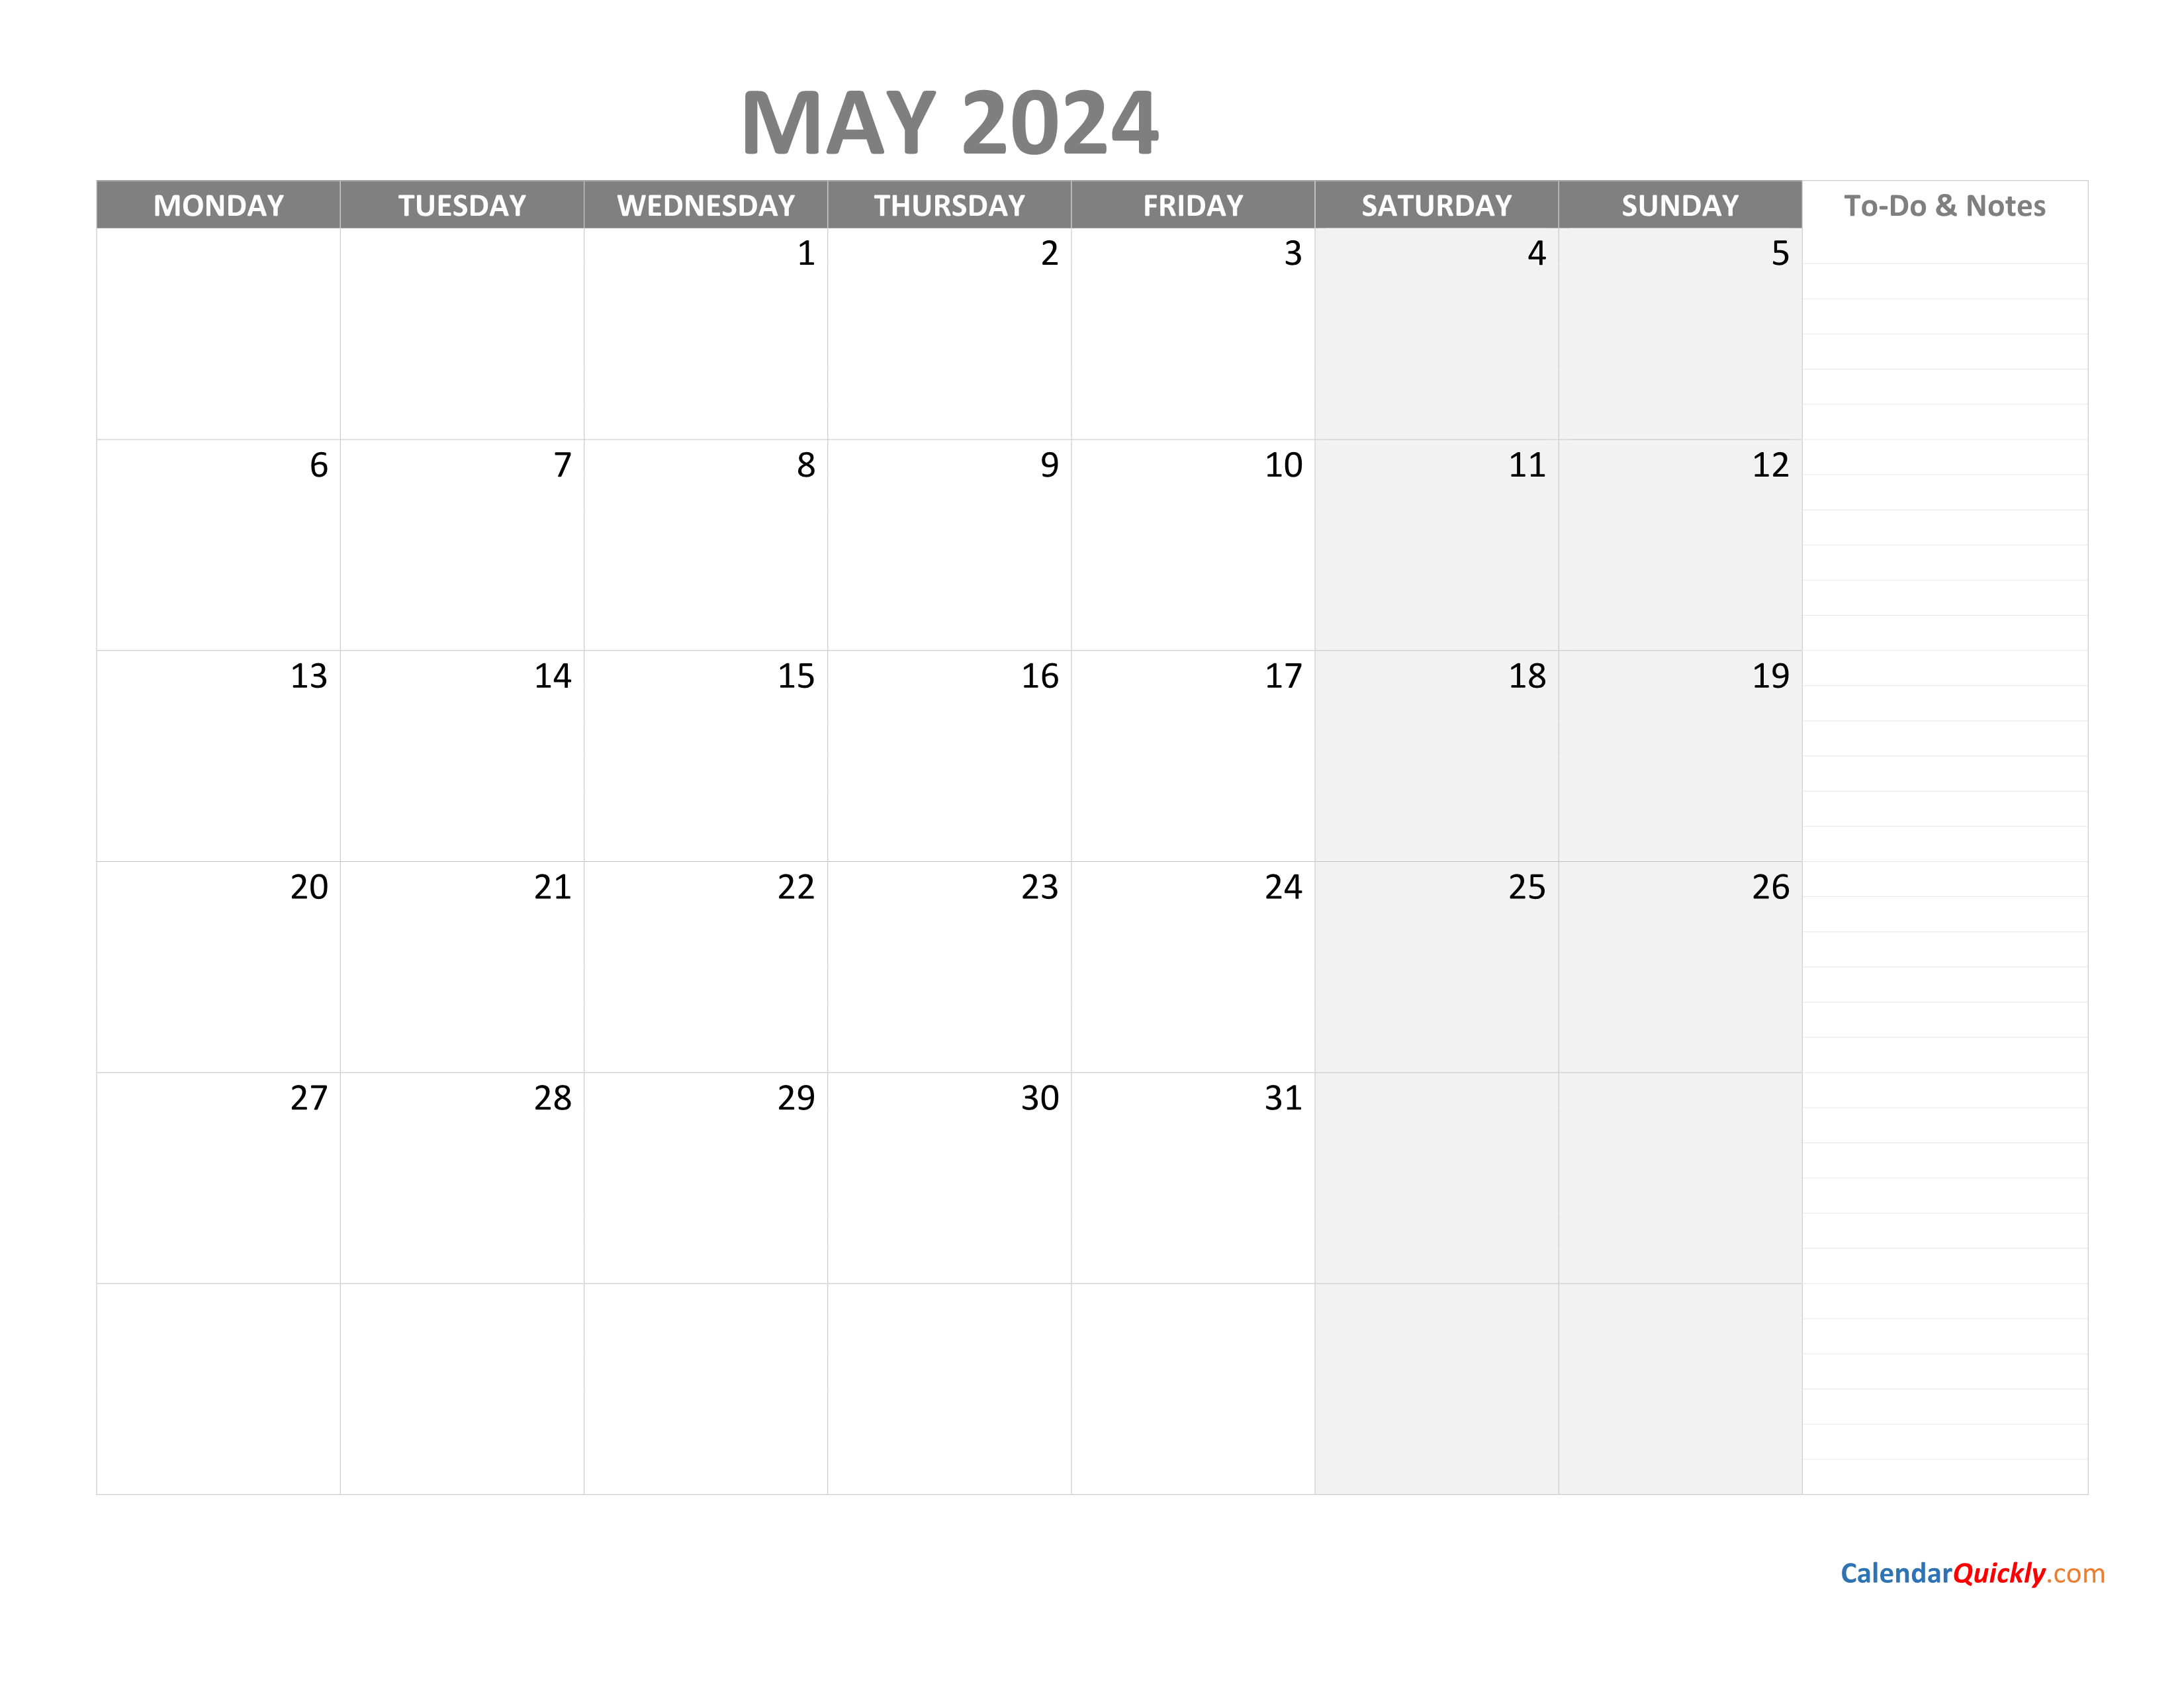 may-2024-calendar-events-best-awasome-list-of-printable-calendar-for-2024-free